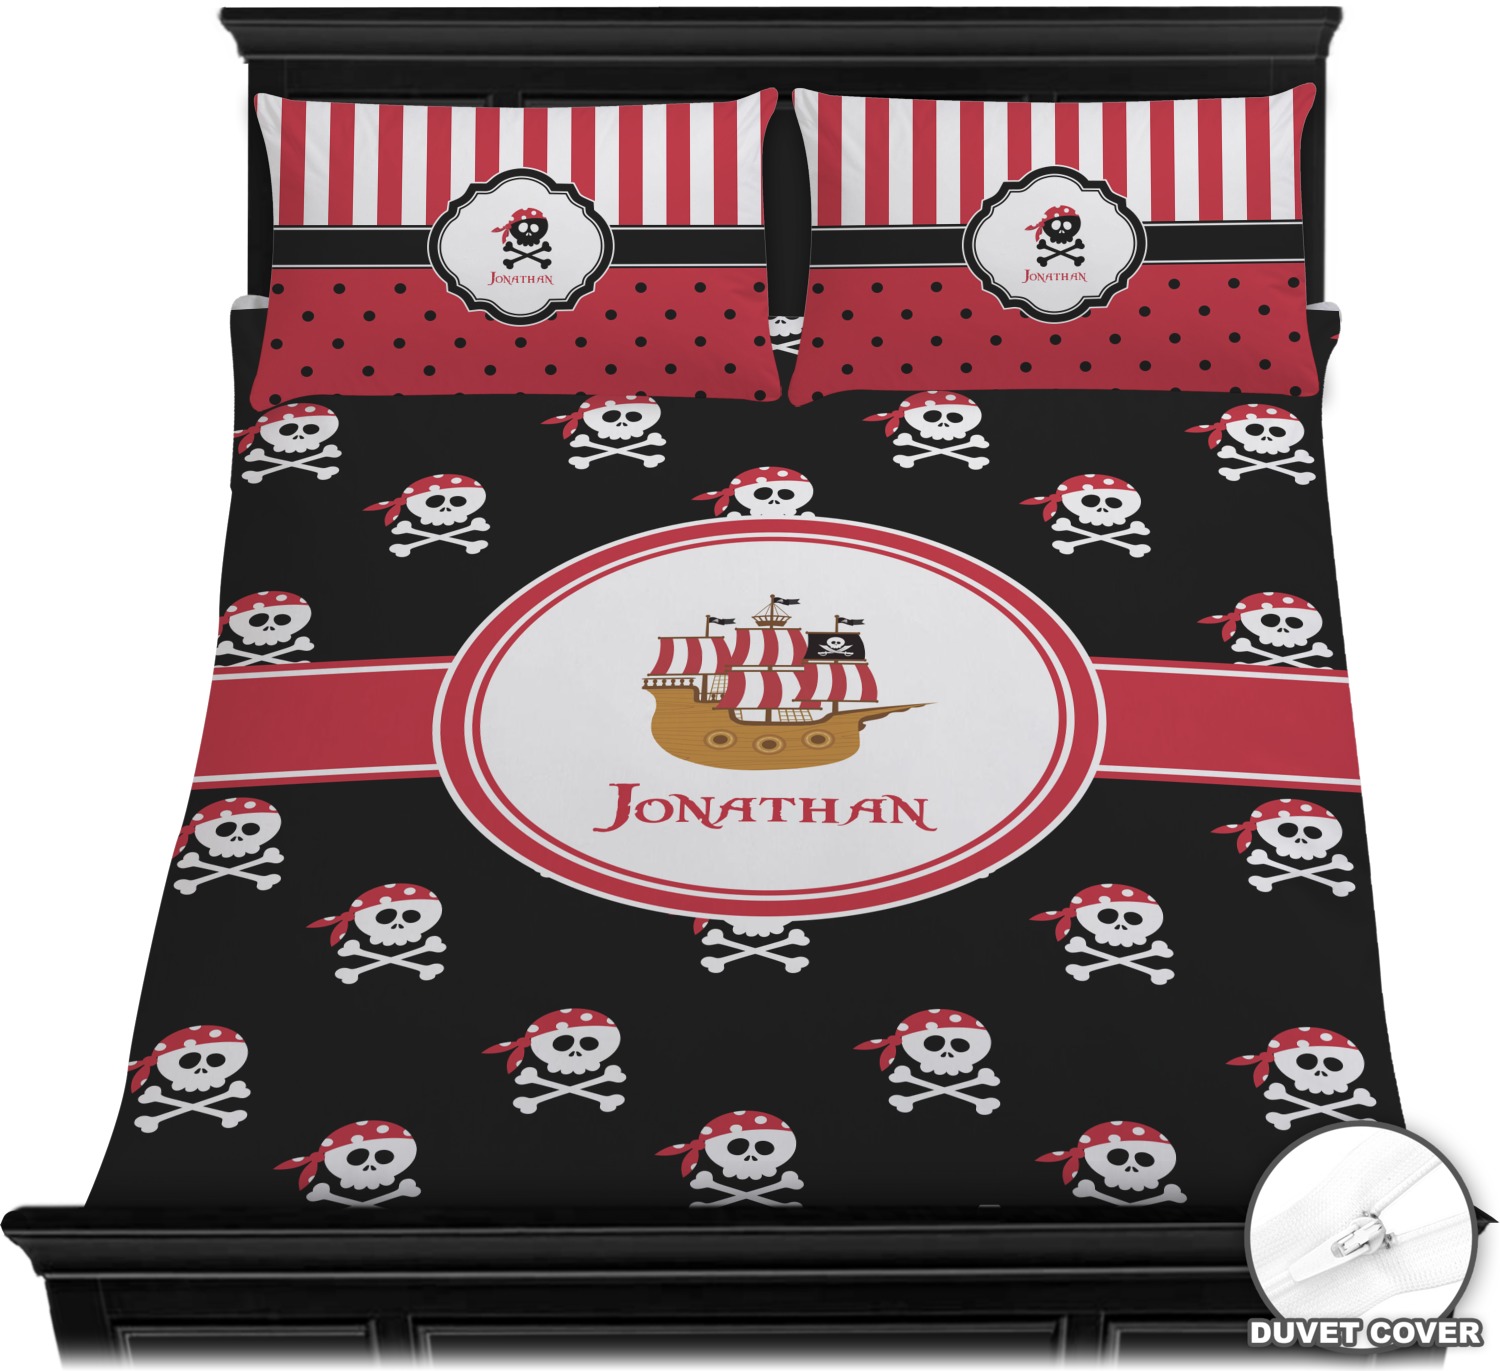 Pirate Duvet Covers Personalized Youcustomizeit